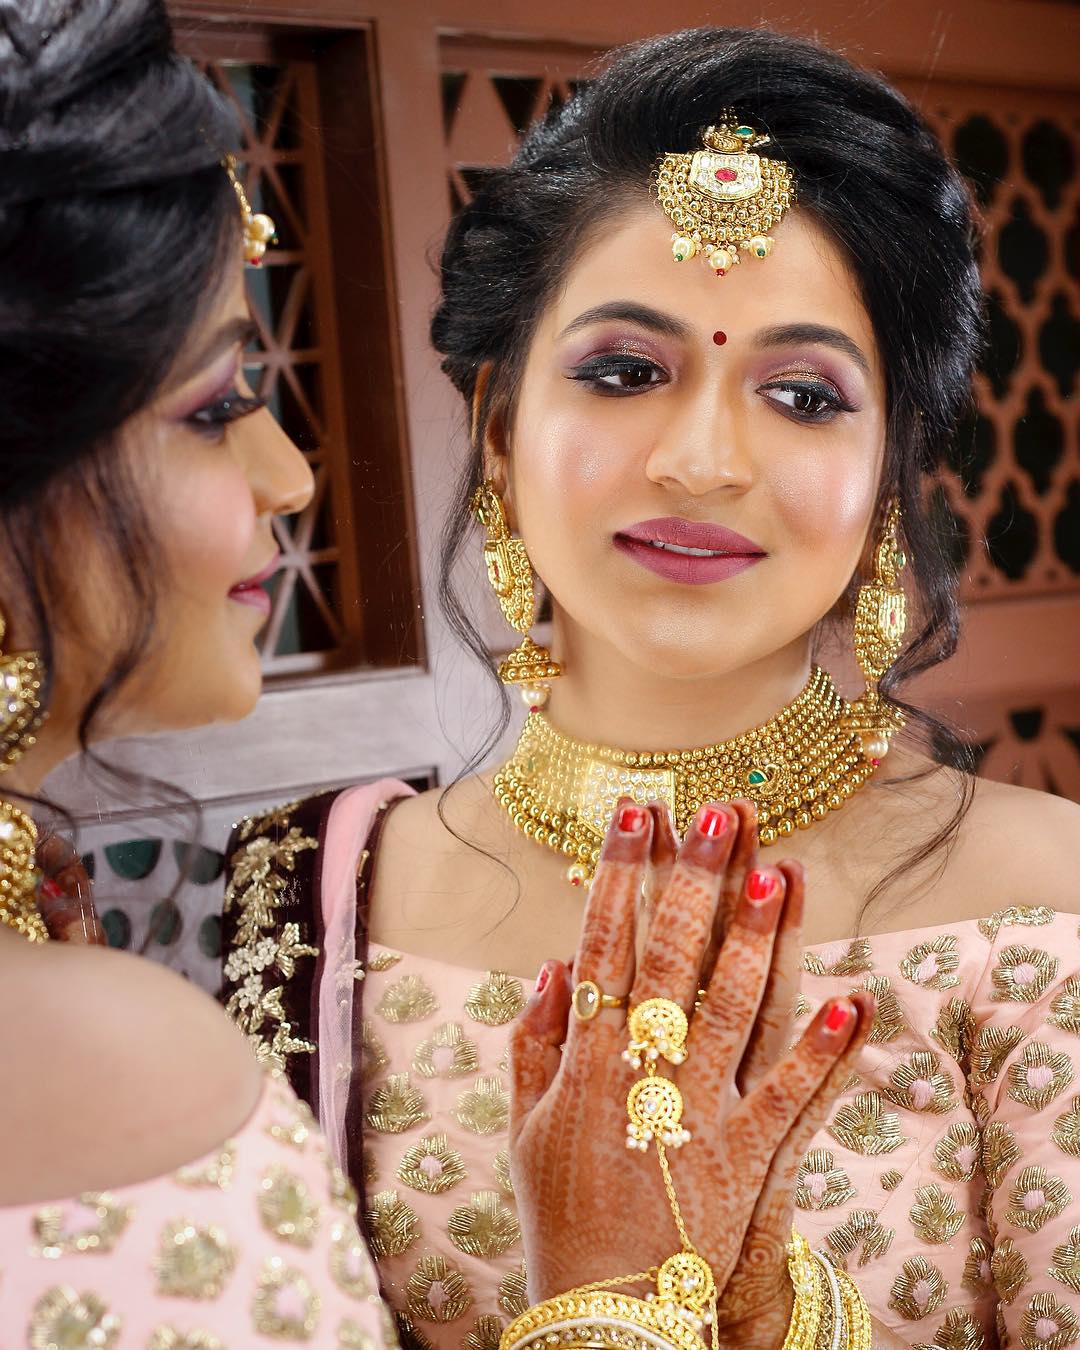  Soft and subtle: Indian Bridal Makeup Look in Celeb Style